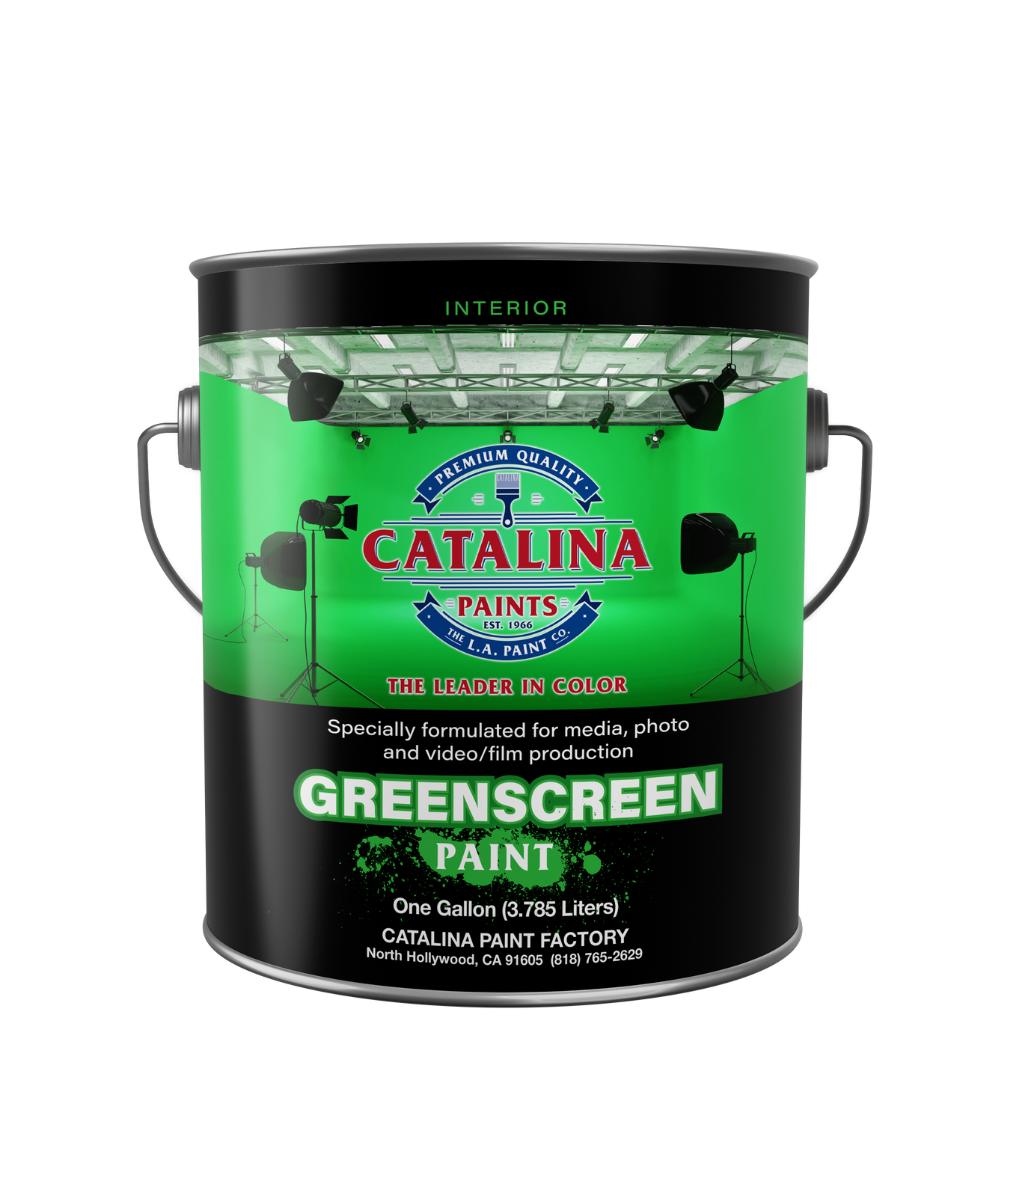 Catalina Greenscreen paint is perfect for media, photo and video/film production. Available at Catalina Paints in Los Angeles.